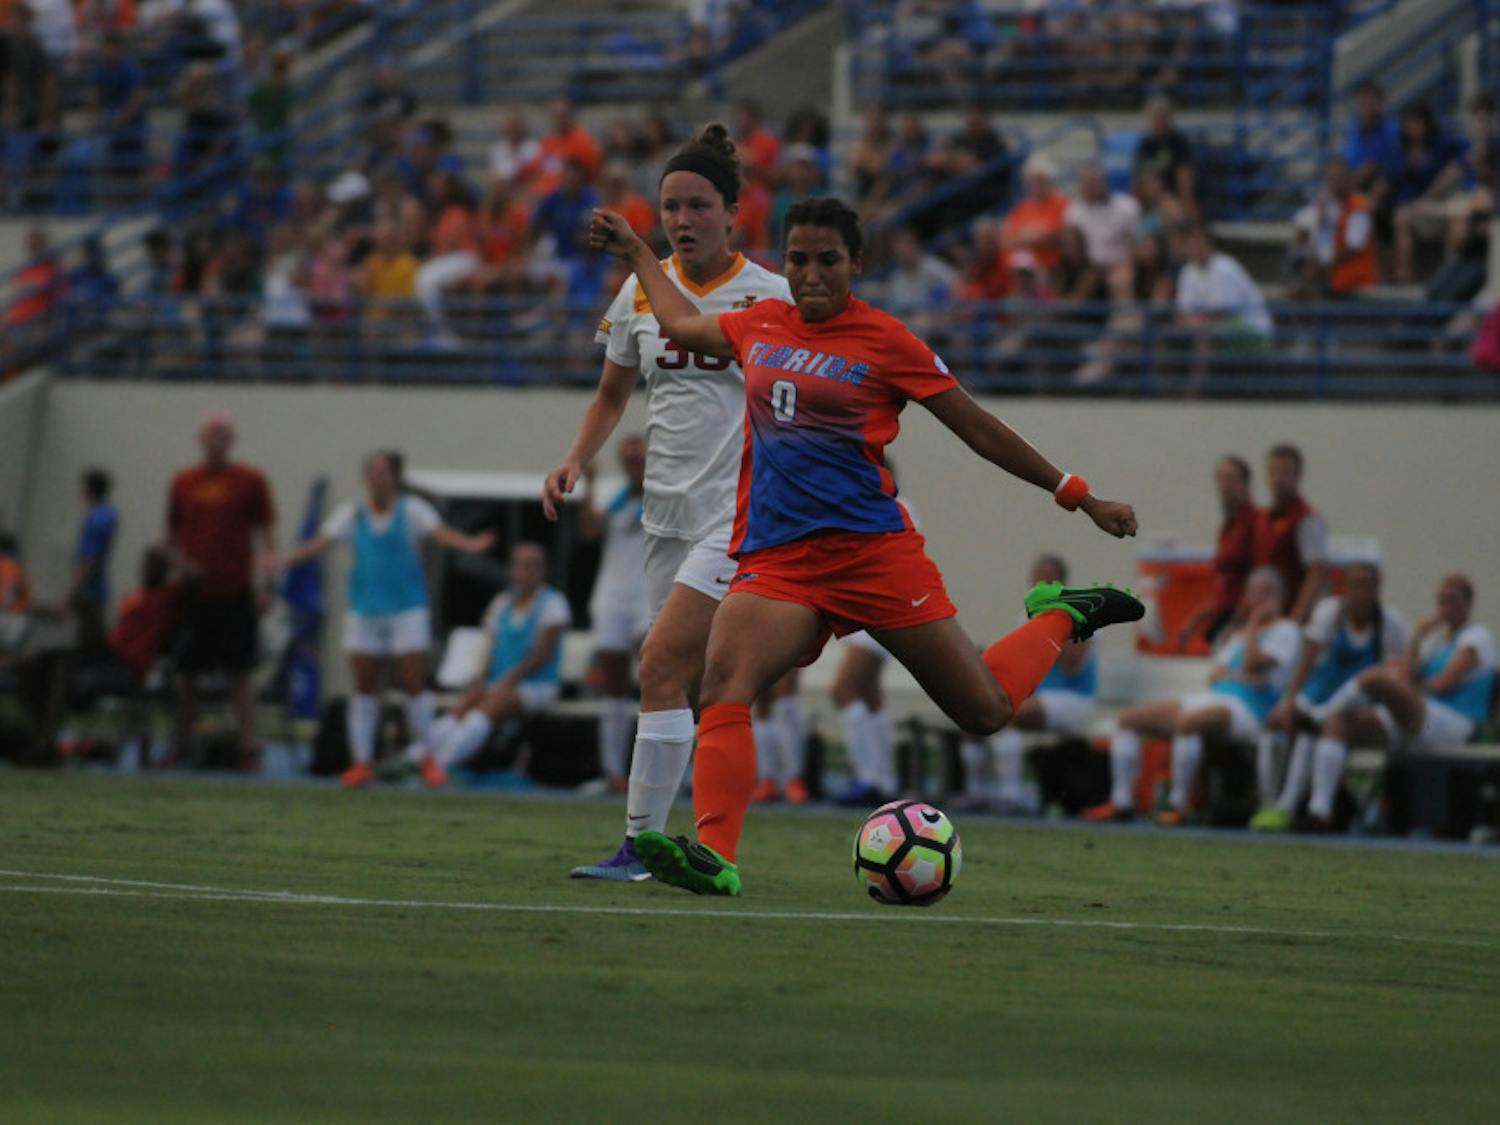 UF midfielder Briana Solis takes a shot during Florida's 5-2 win against Iowa State on Aug. 19, 2016, at James G. Pressly Stadium.